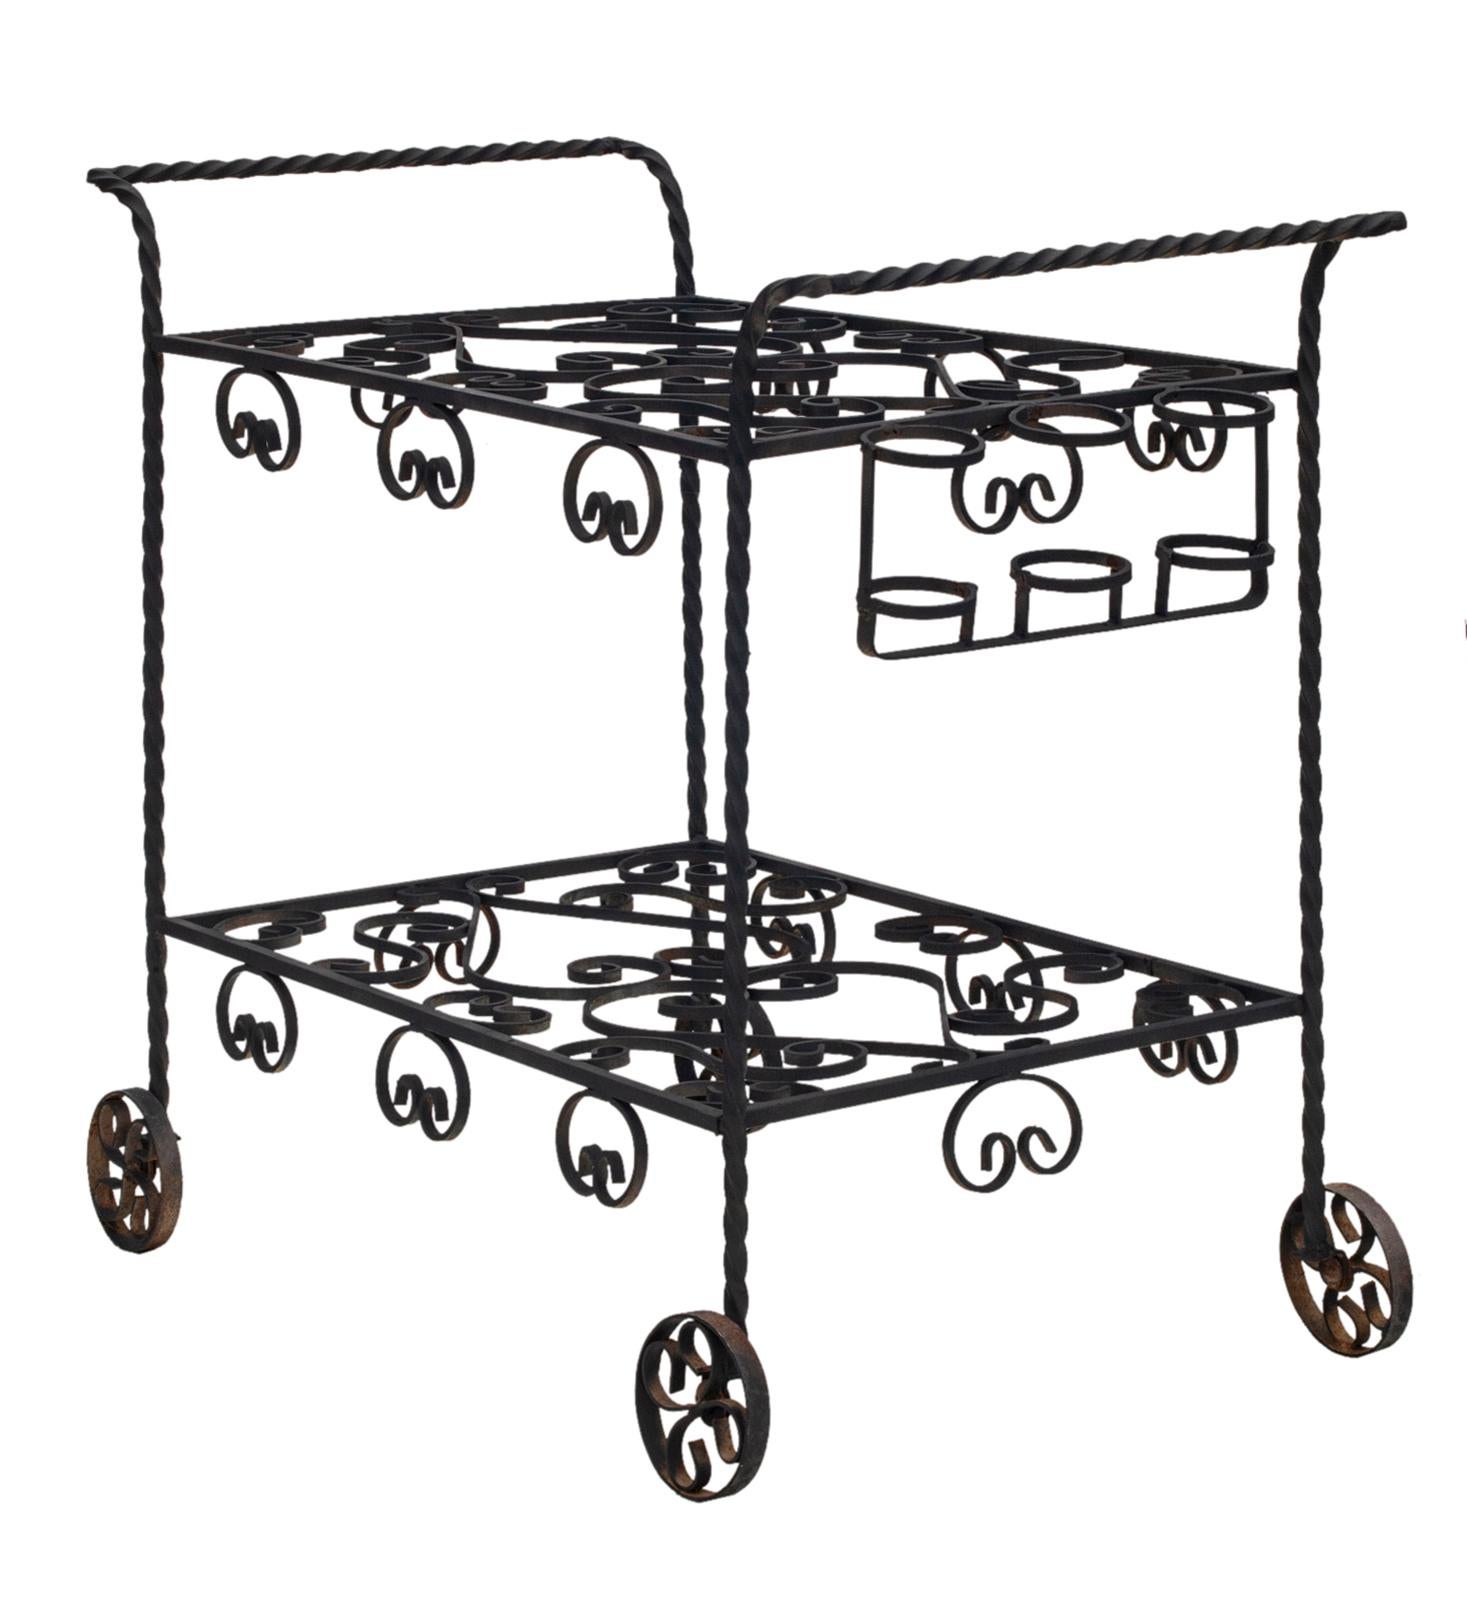 Vintage wrought iron garden bar cart featuring a decorative lower tier with scrollwork.
Quality American craftsmanship made in the '40's with great style & form. 
Decorative wheels for mobility.
Refinished in matte black.
Optional plexiglass tops.
